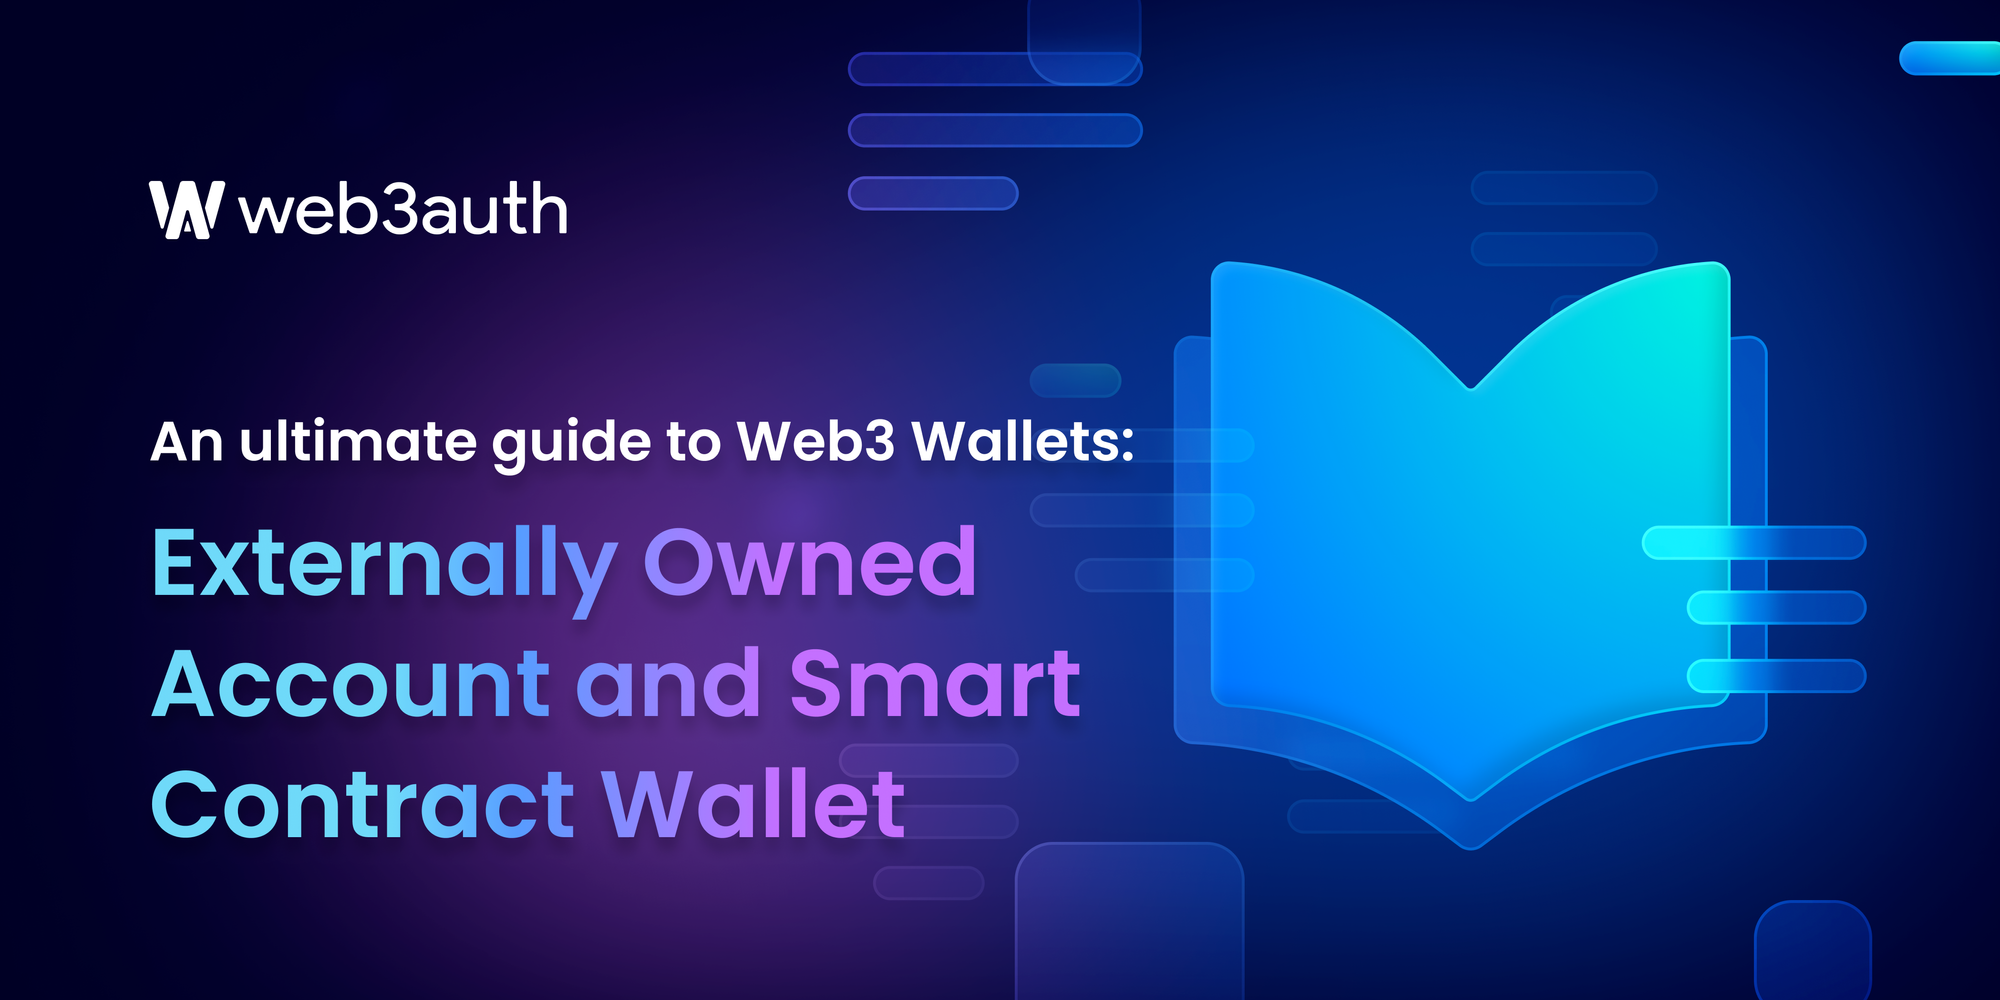 An ultimate guide to Web3 Wallets: Externally Owned Account and Smart Contract Wallet